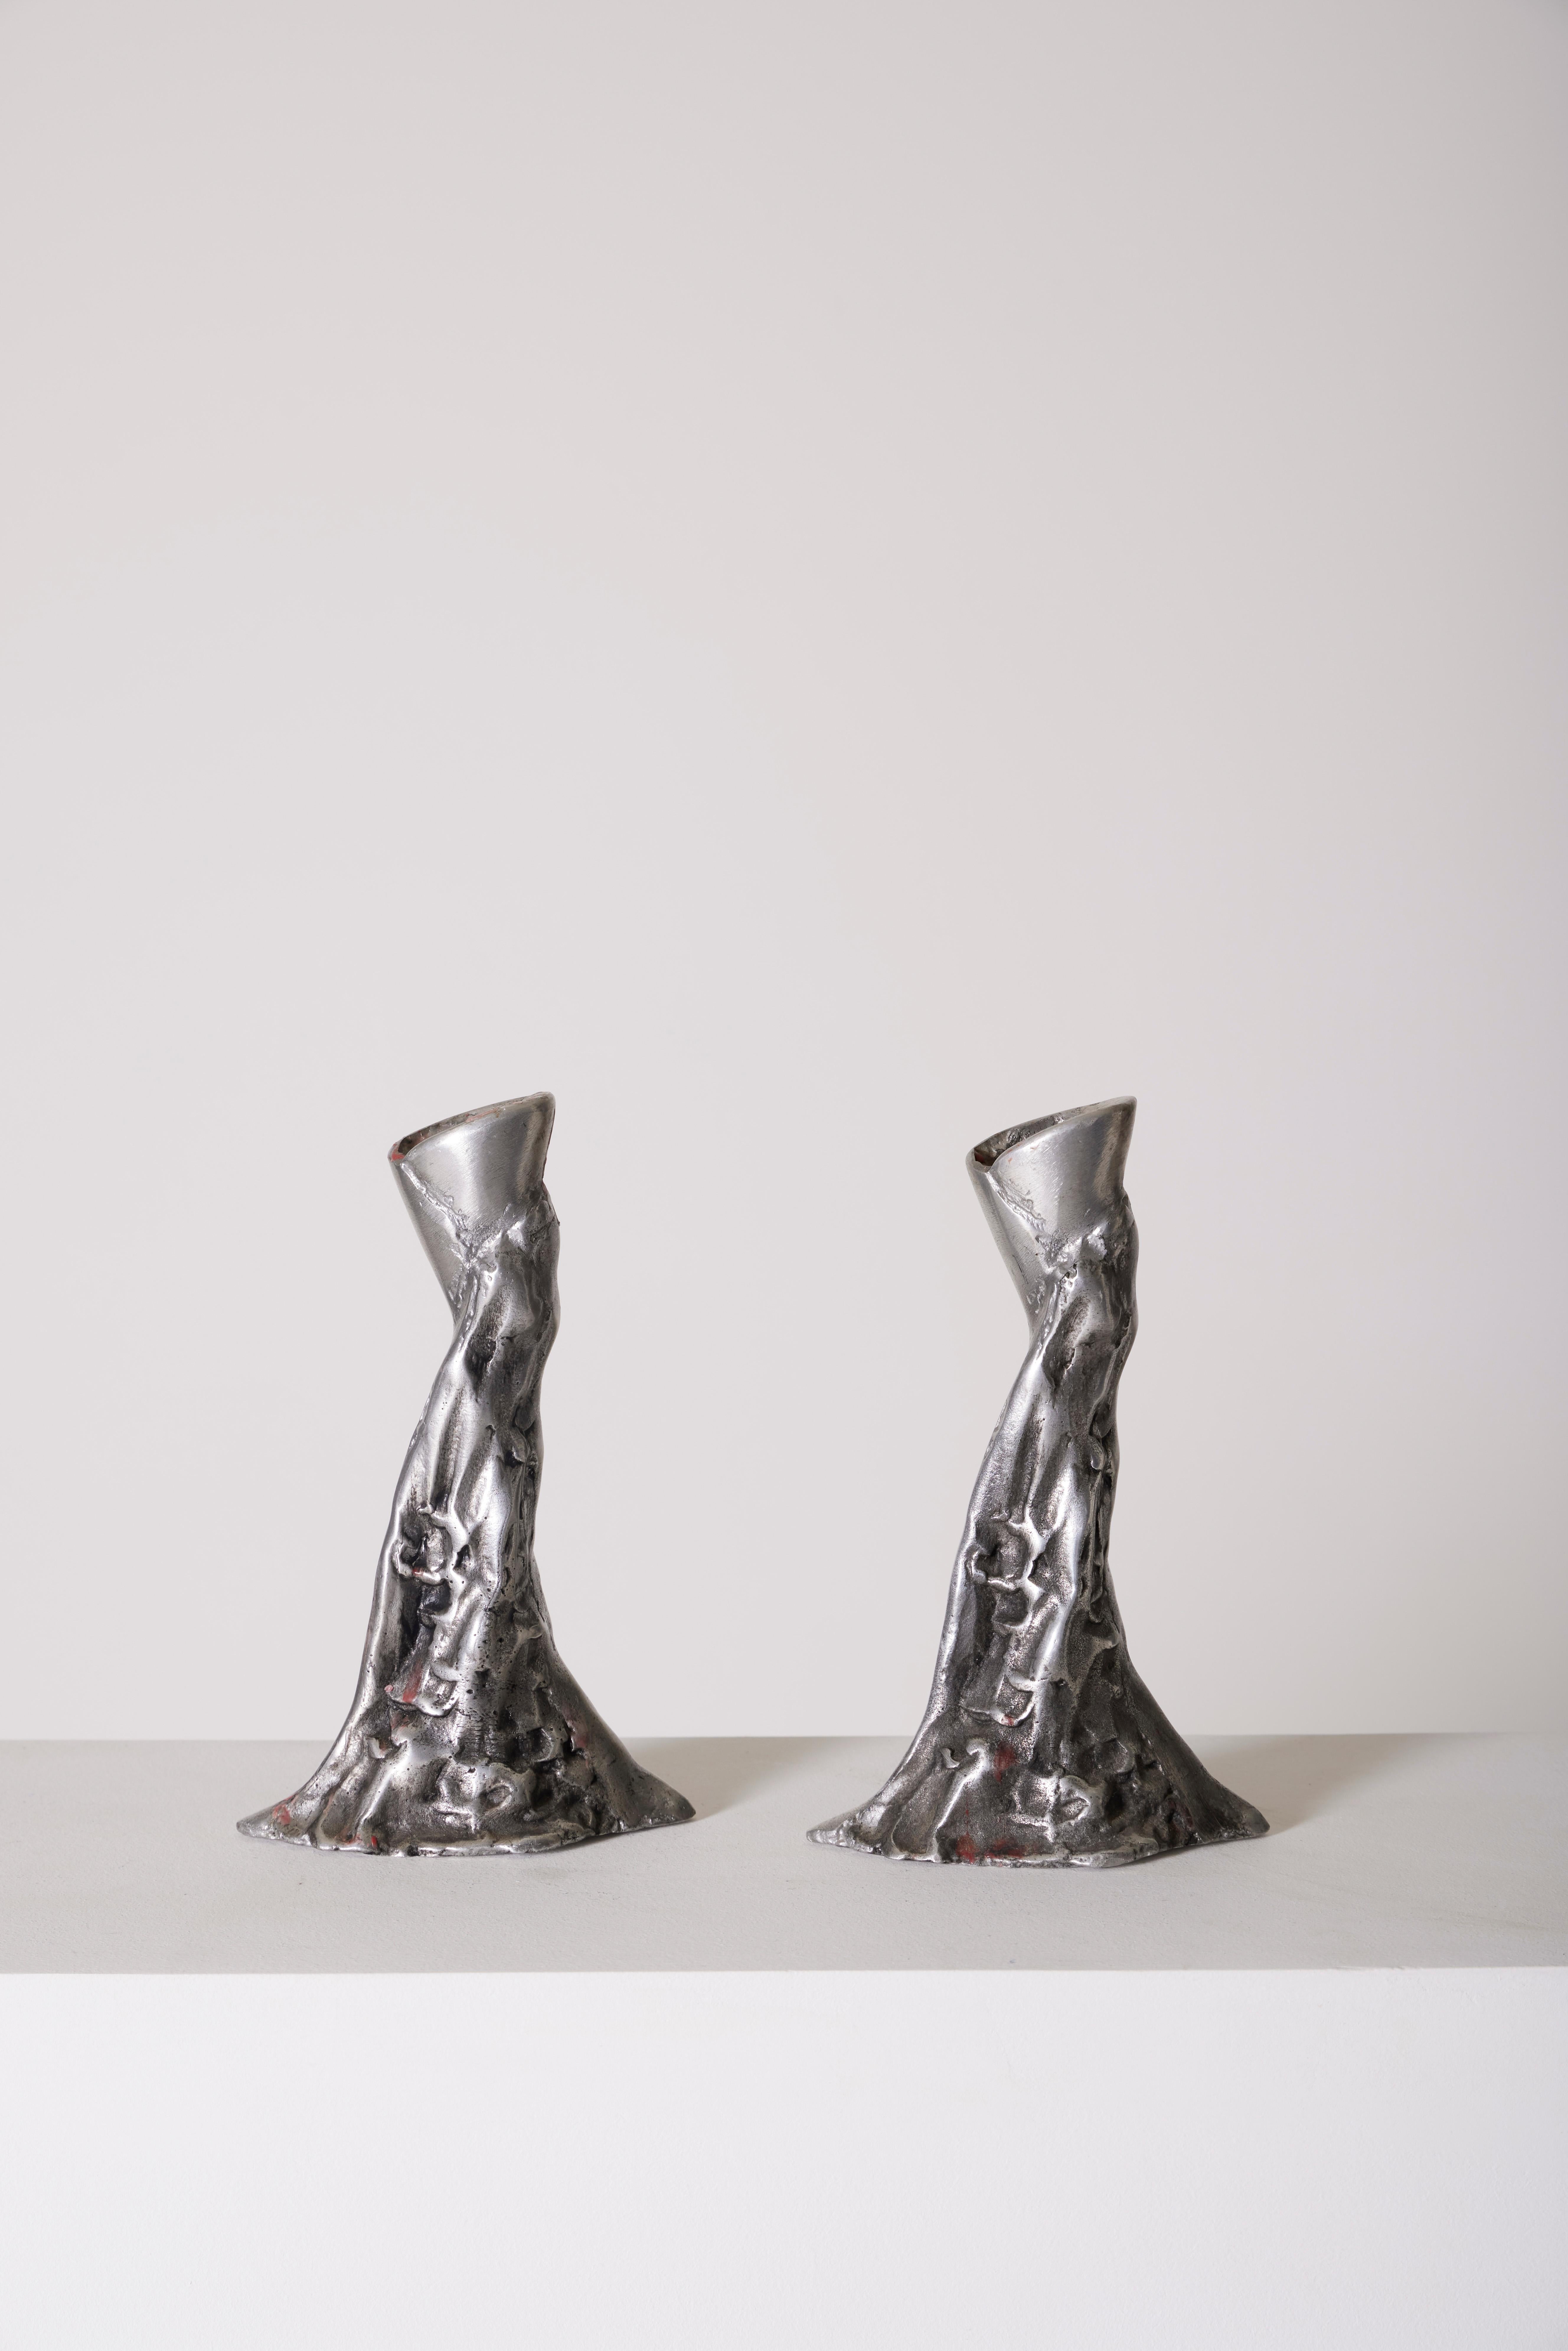 Silver Plate Pair of candlesticks